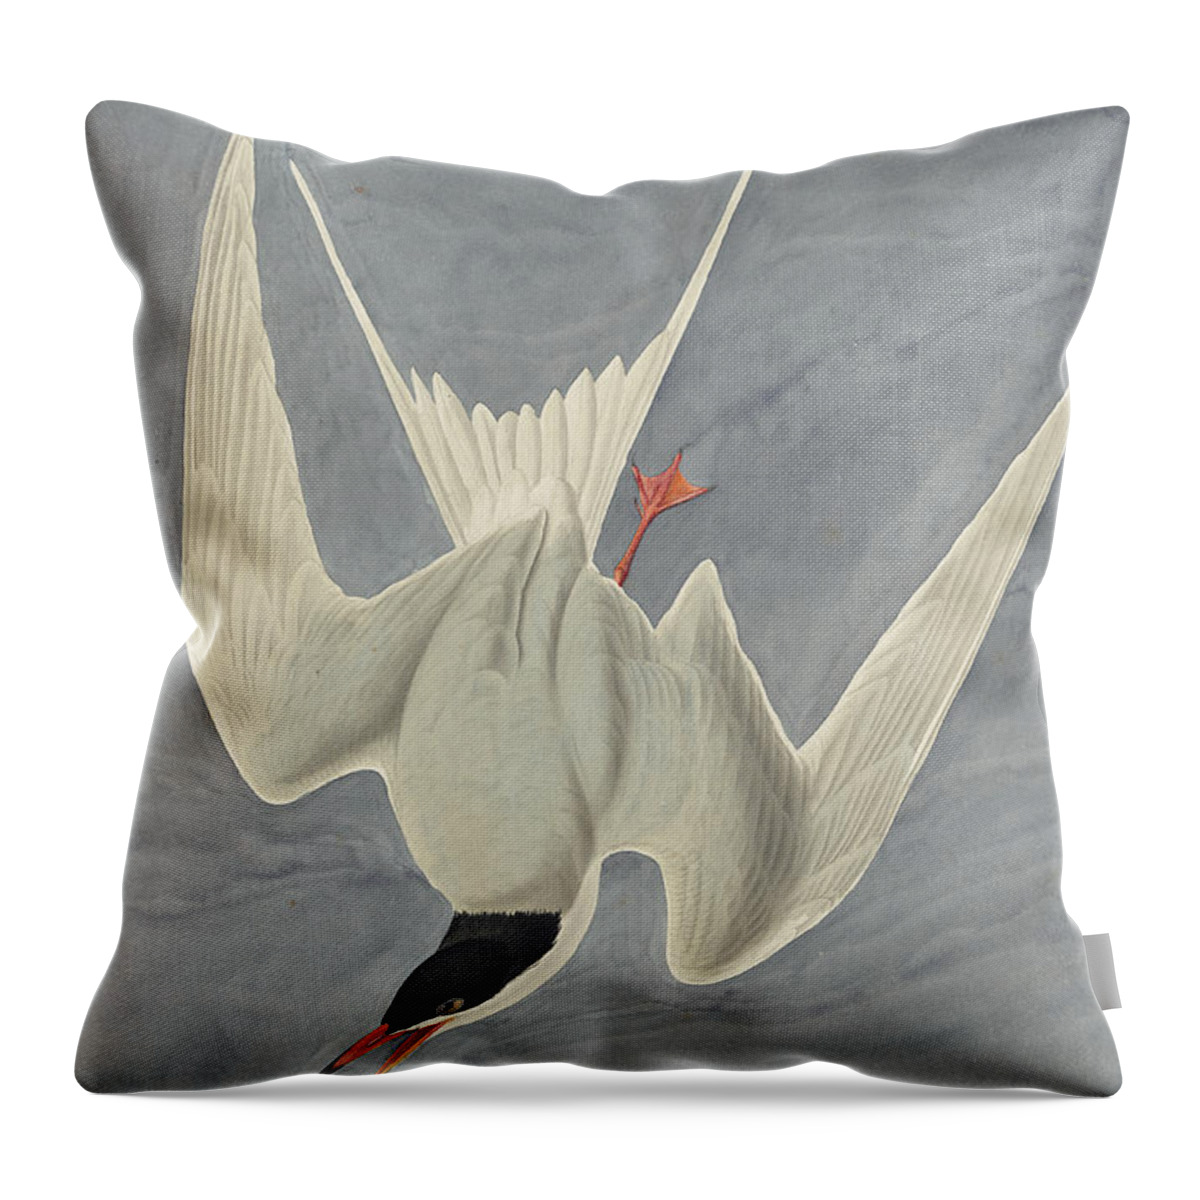 Audubon Throw Pillow featuring the drawing Common Tern by Celestial Images